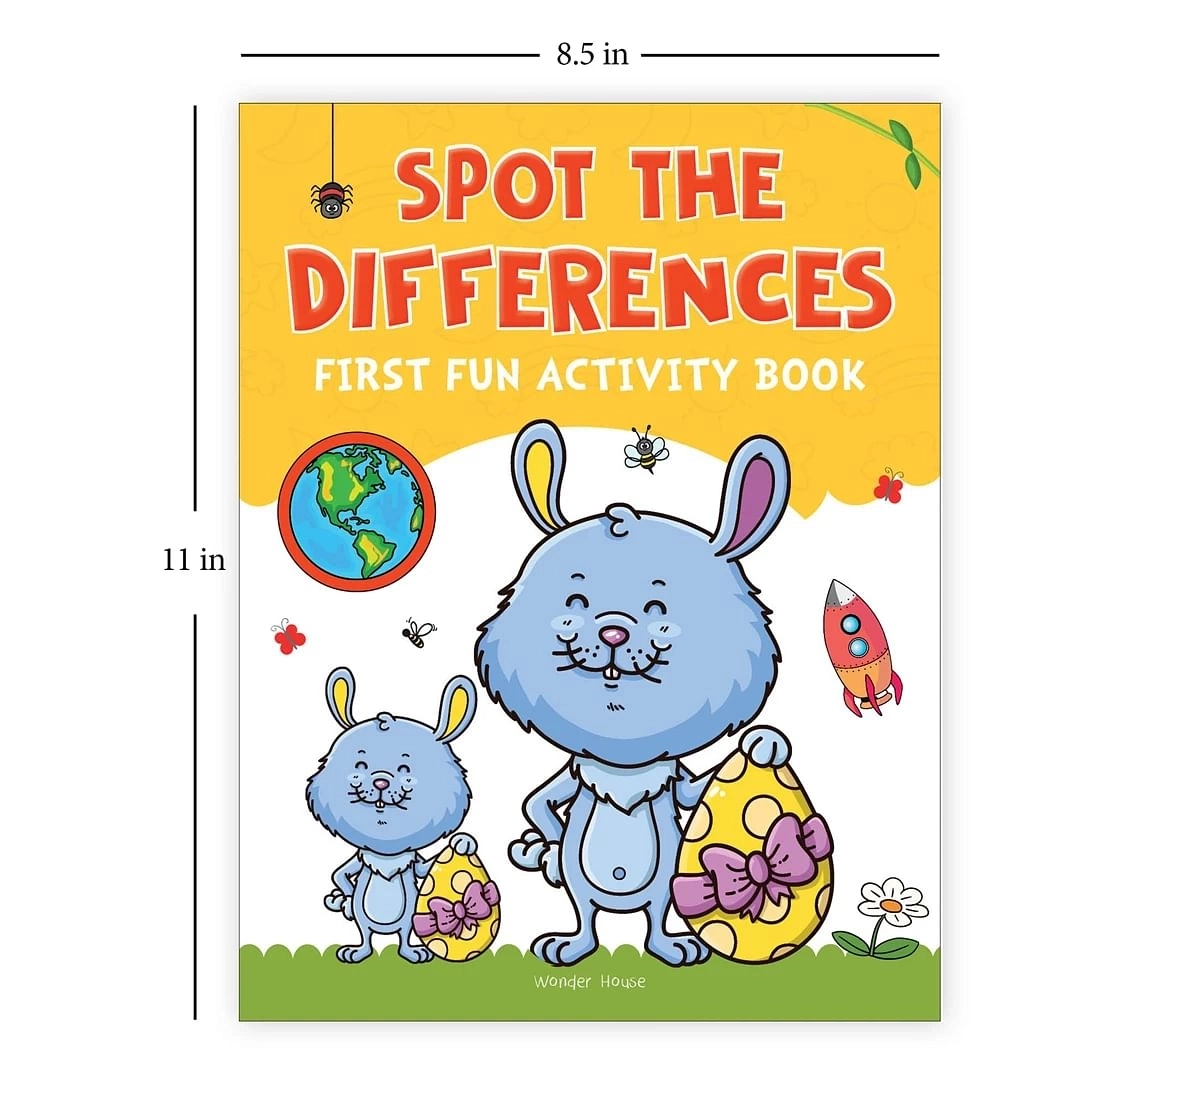 Wonder House Books Spot the Difference First Fun Activity Book for kids 0M+, Multicolour